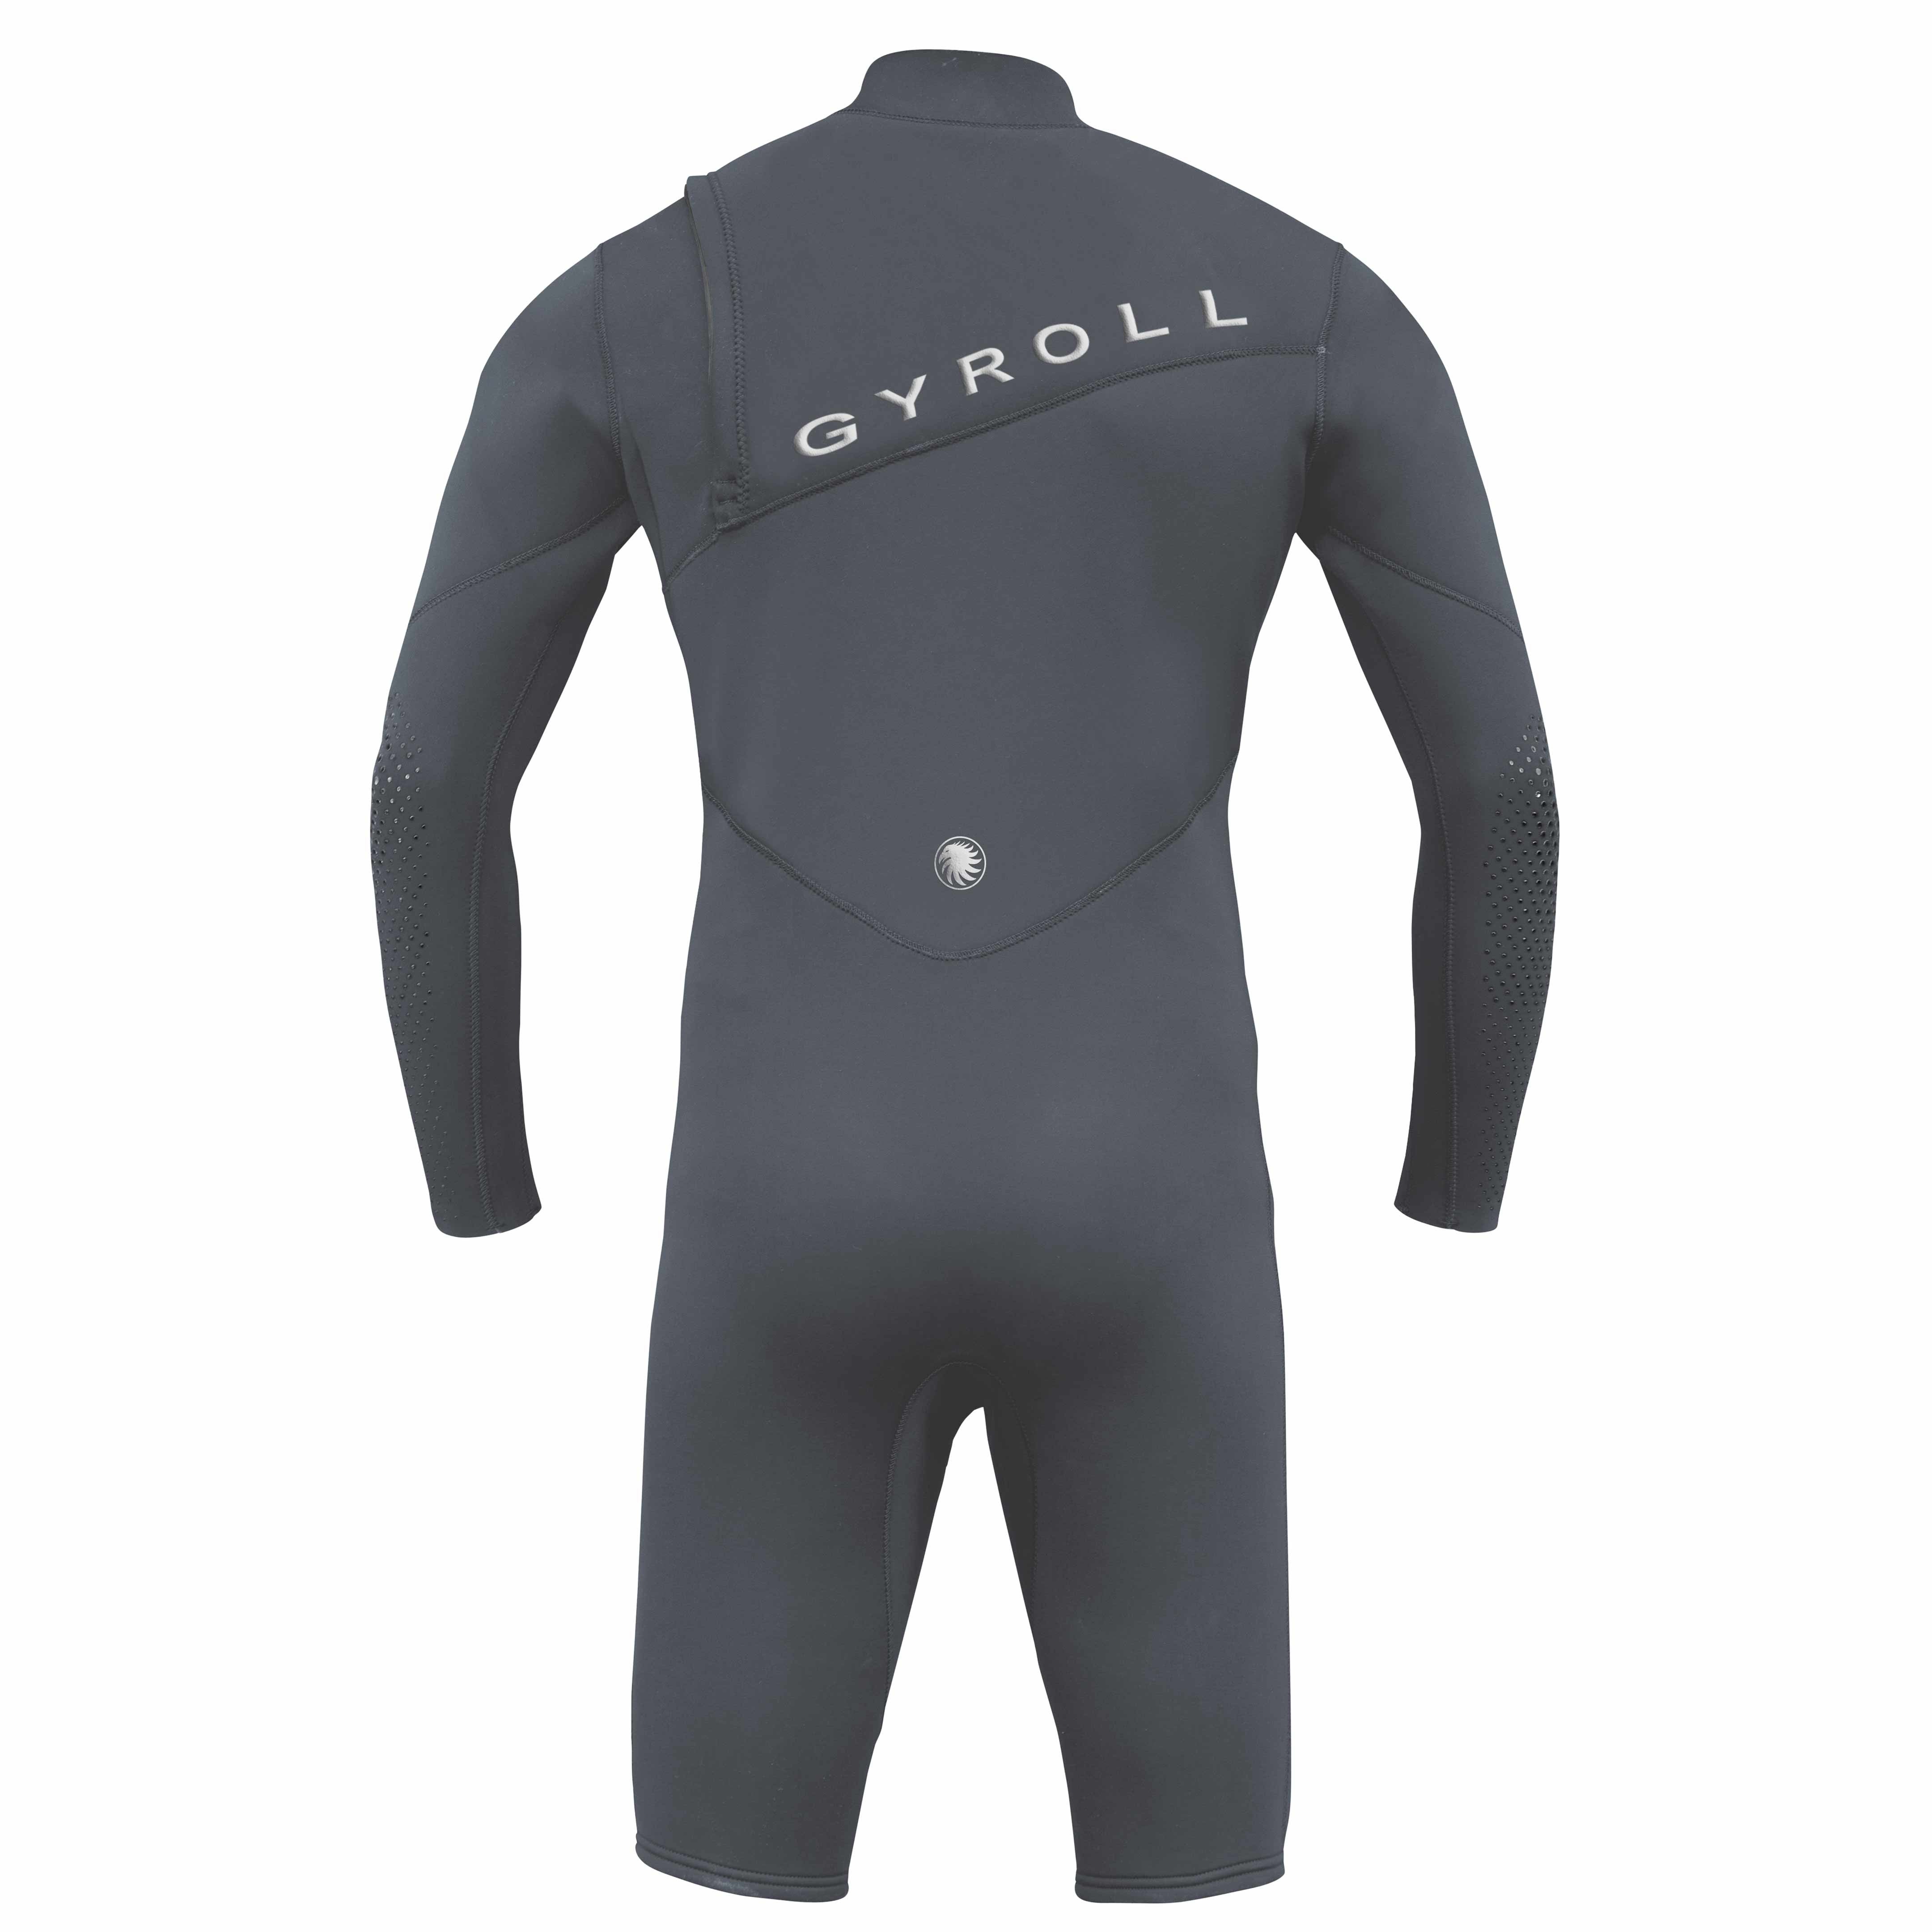 GYROLL - 2/2mm Long Sleeve Spring Suit